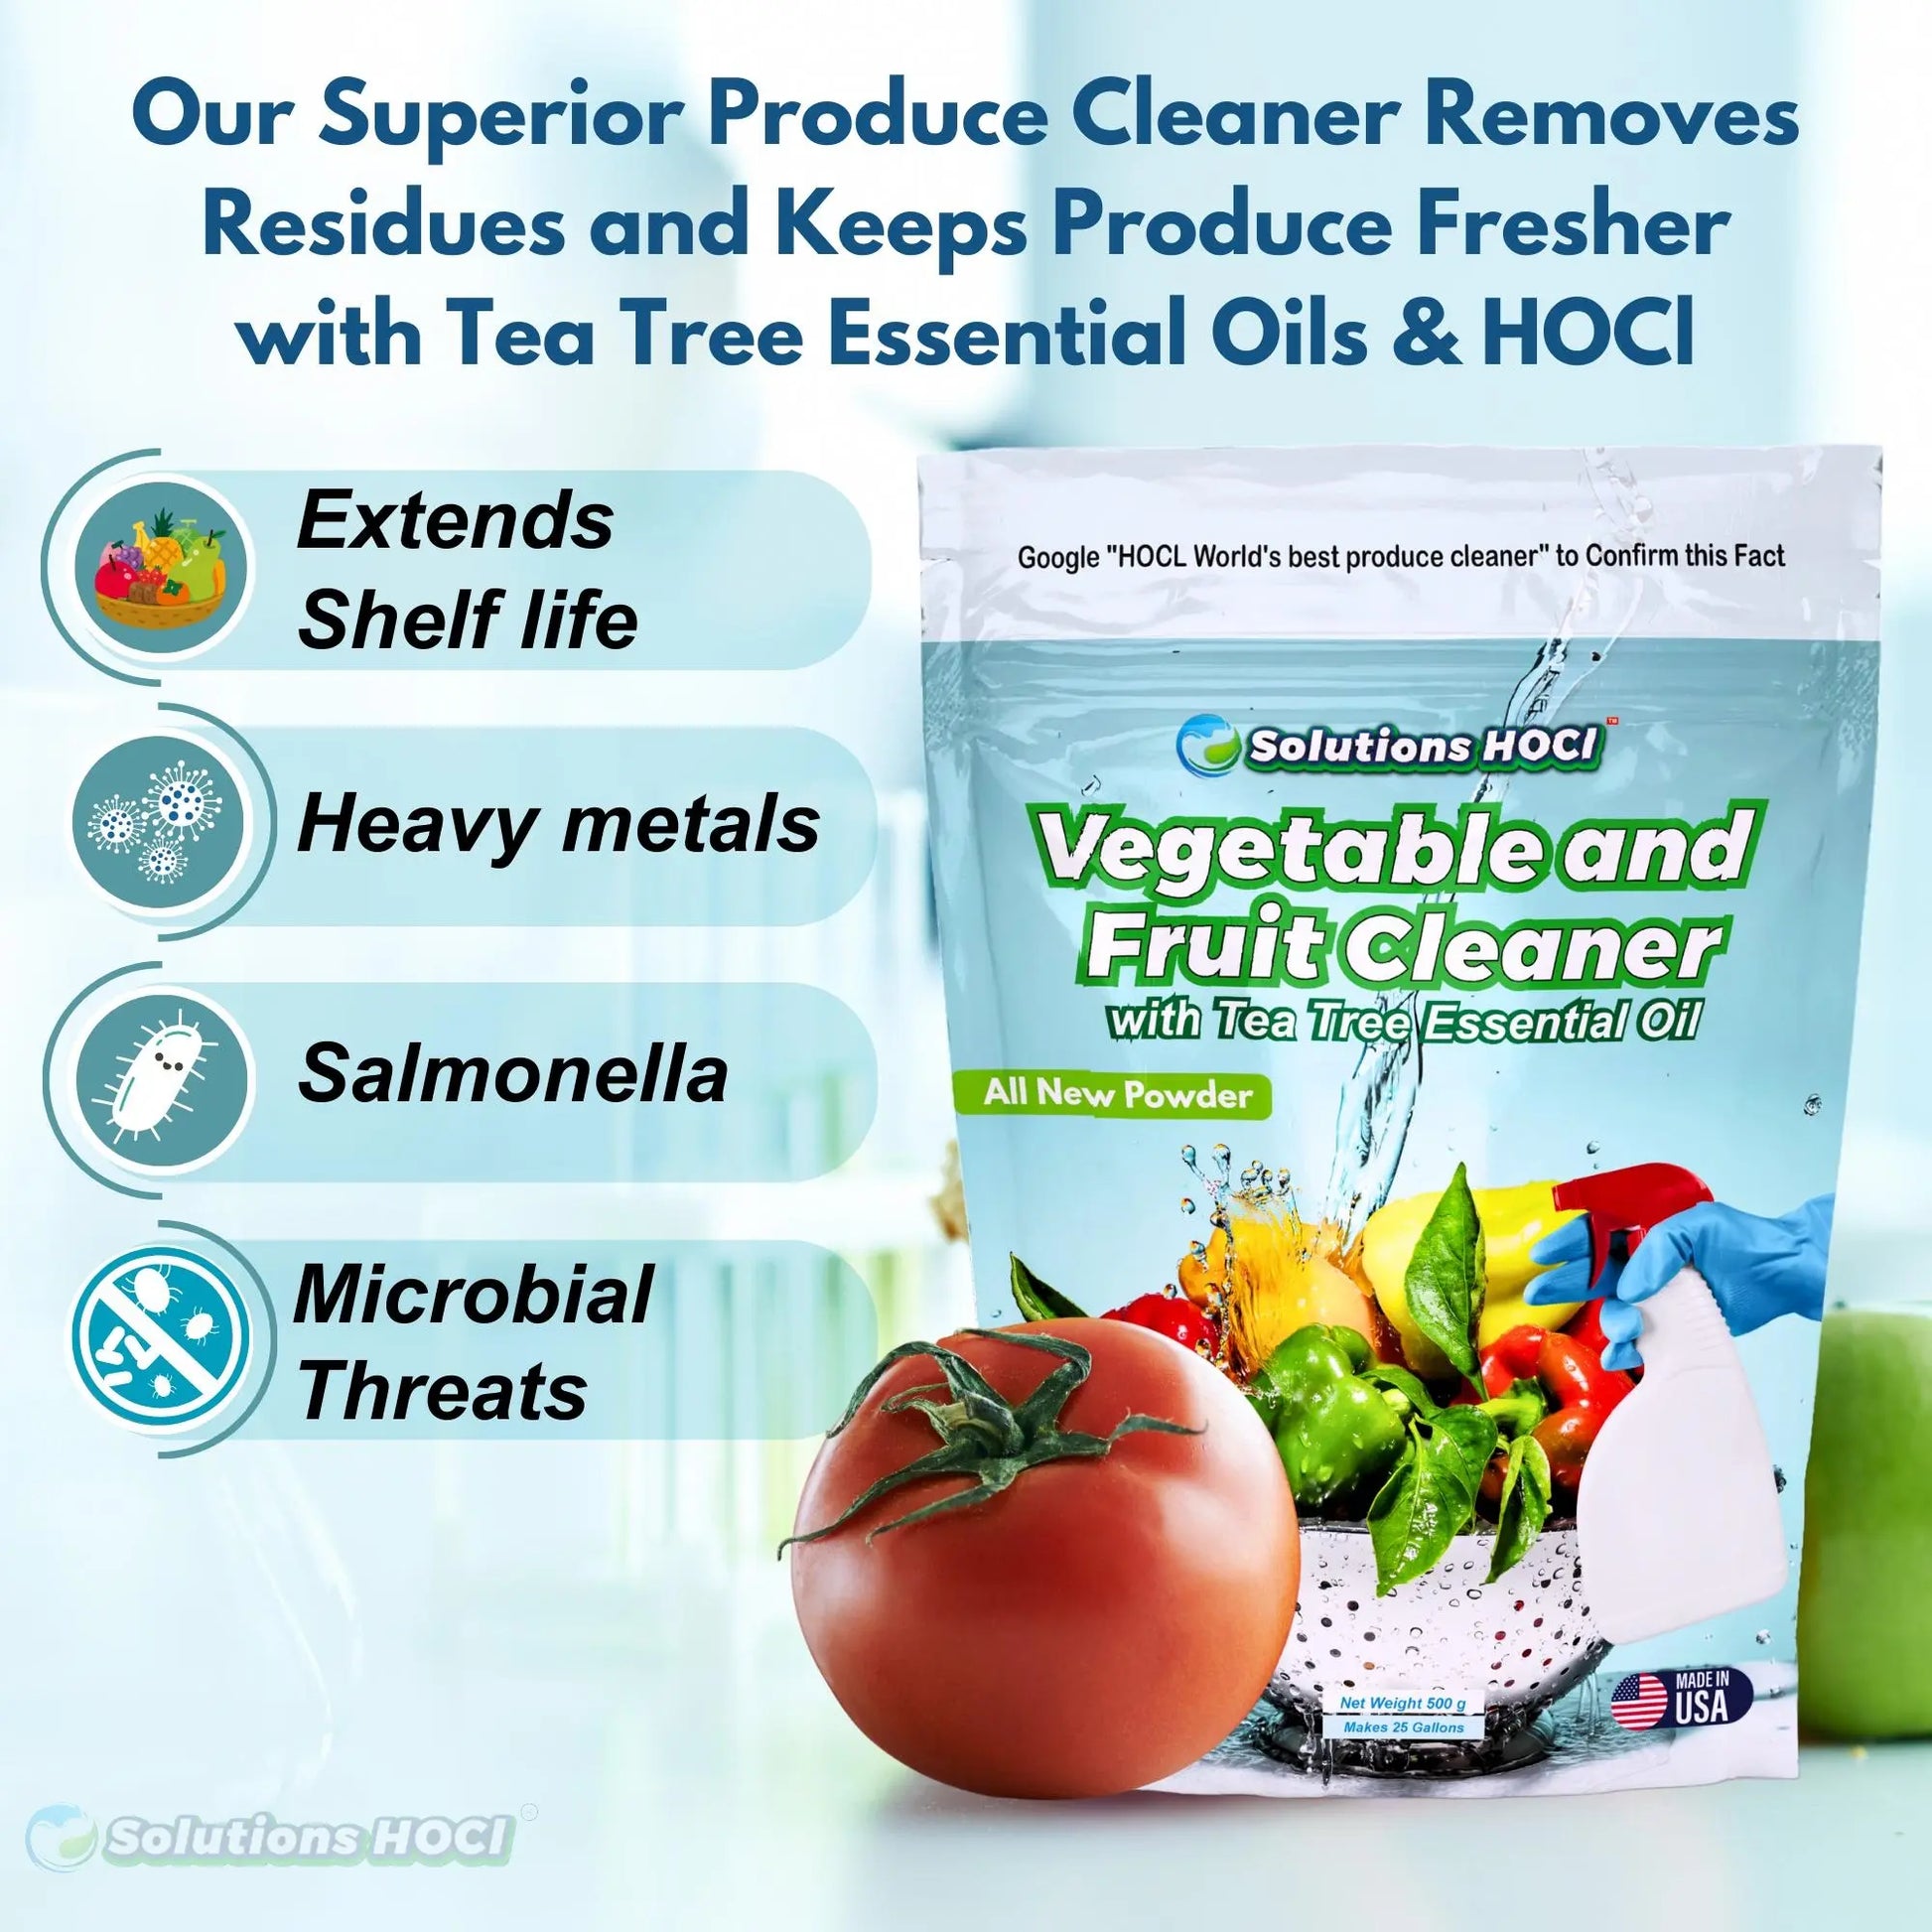 Vegetable and Fruit Cleaner with Tea Tree Essential Oil + HOCL - Solutions HOCL